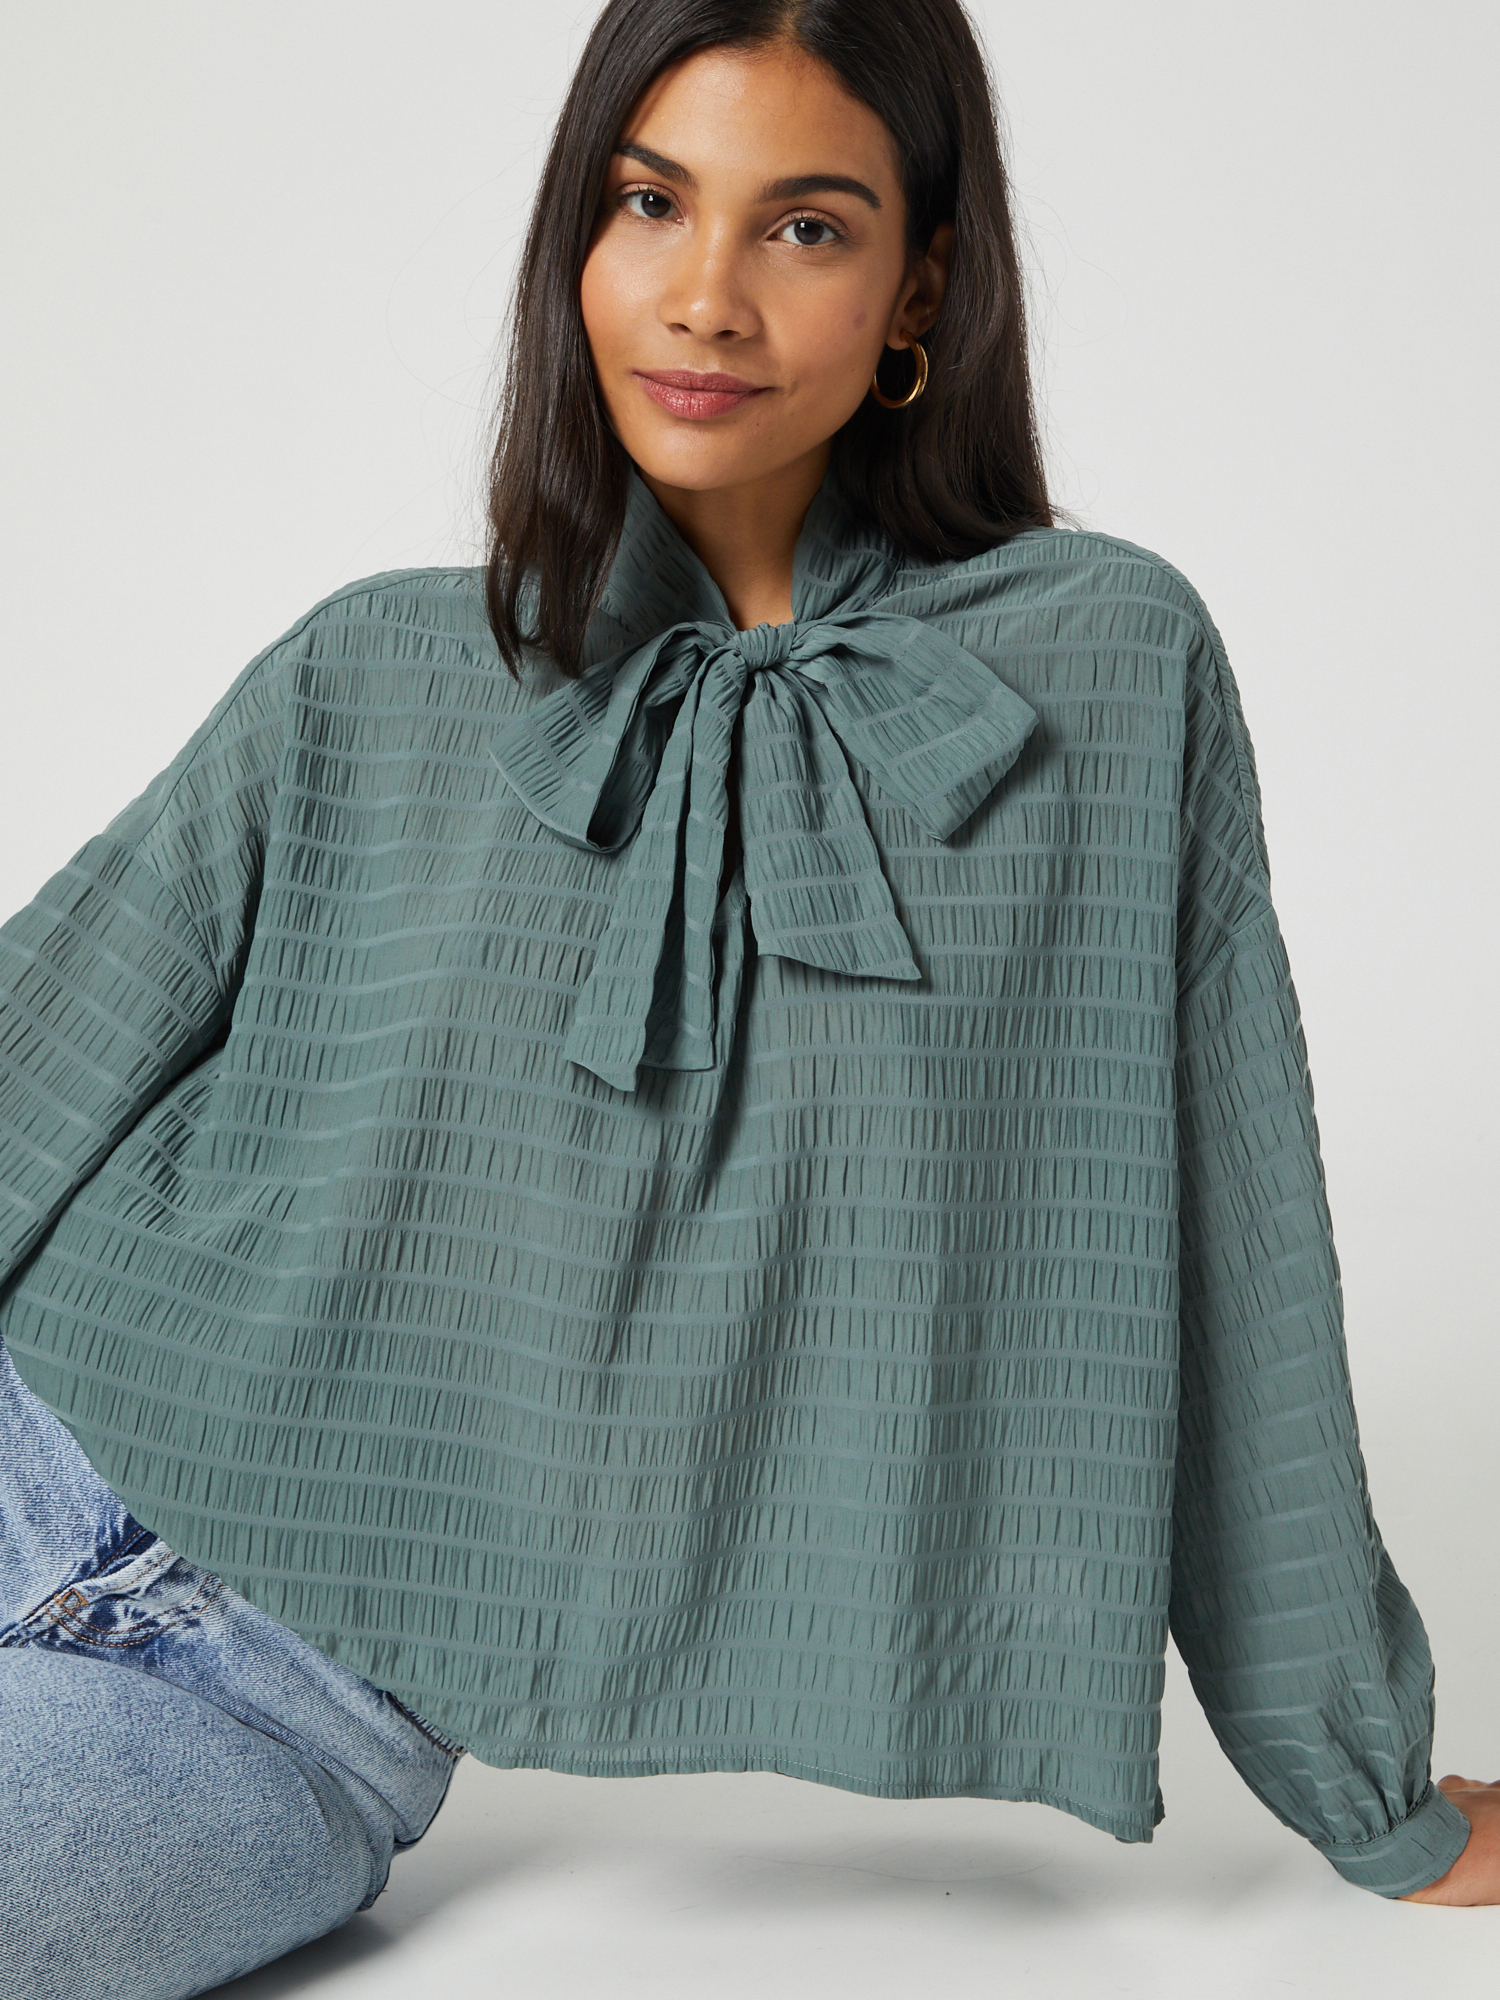 Guido Maria Kretschmer Collection Bluse Jenna in Mint 